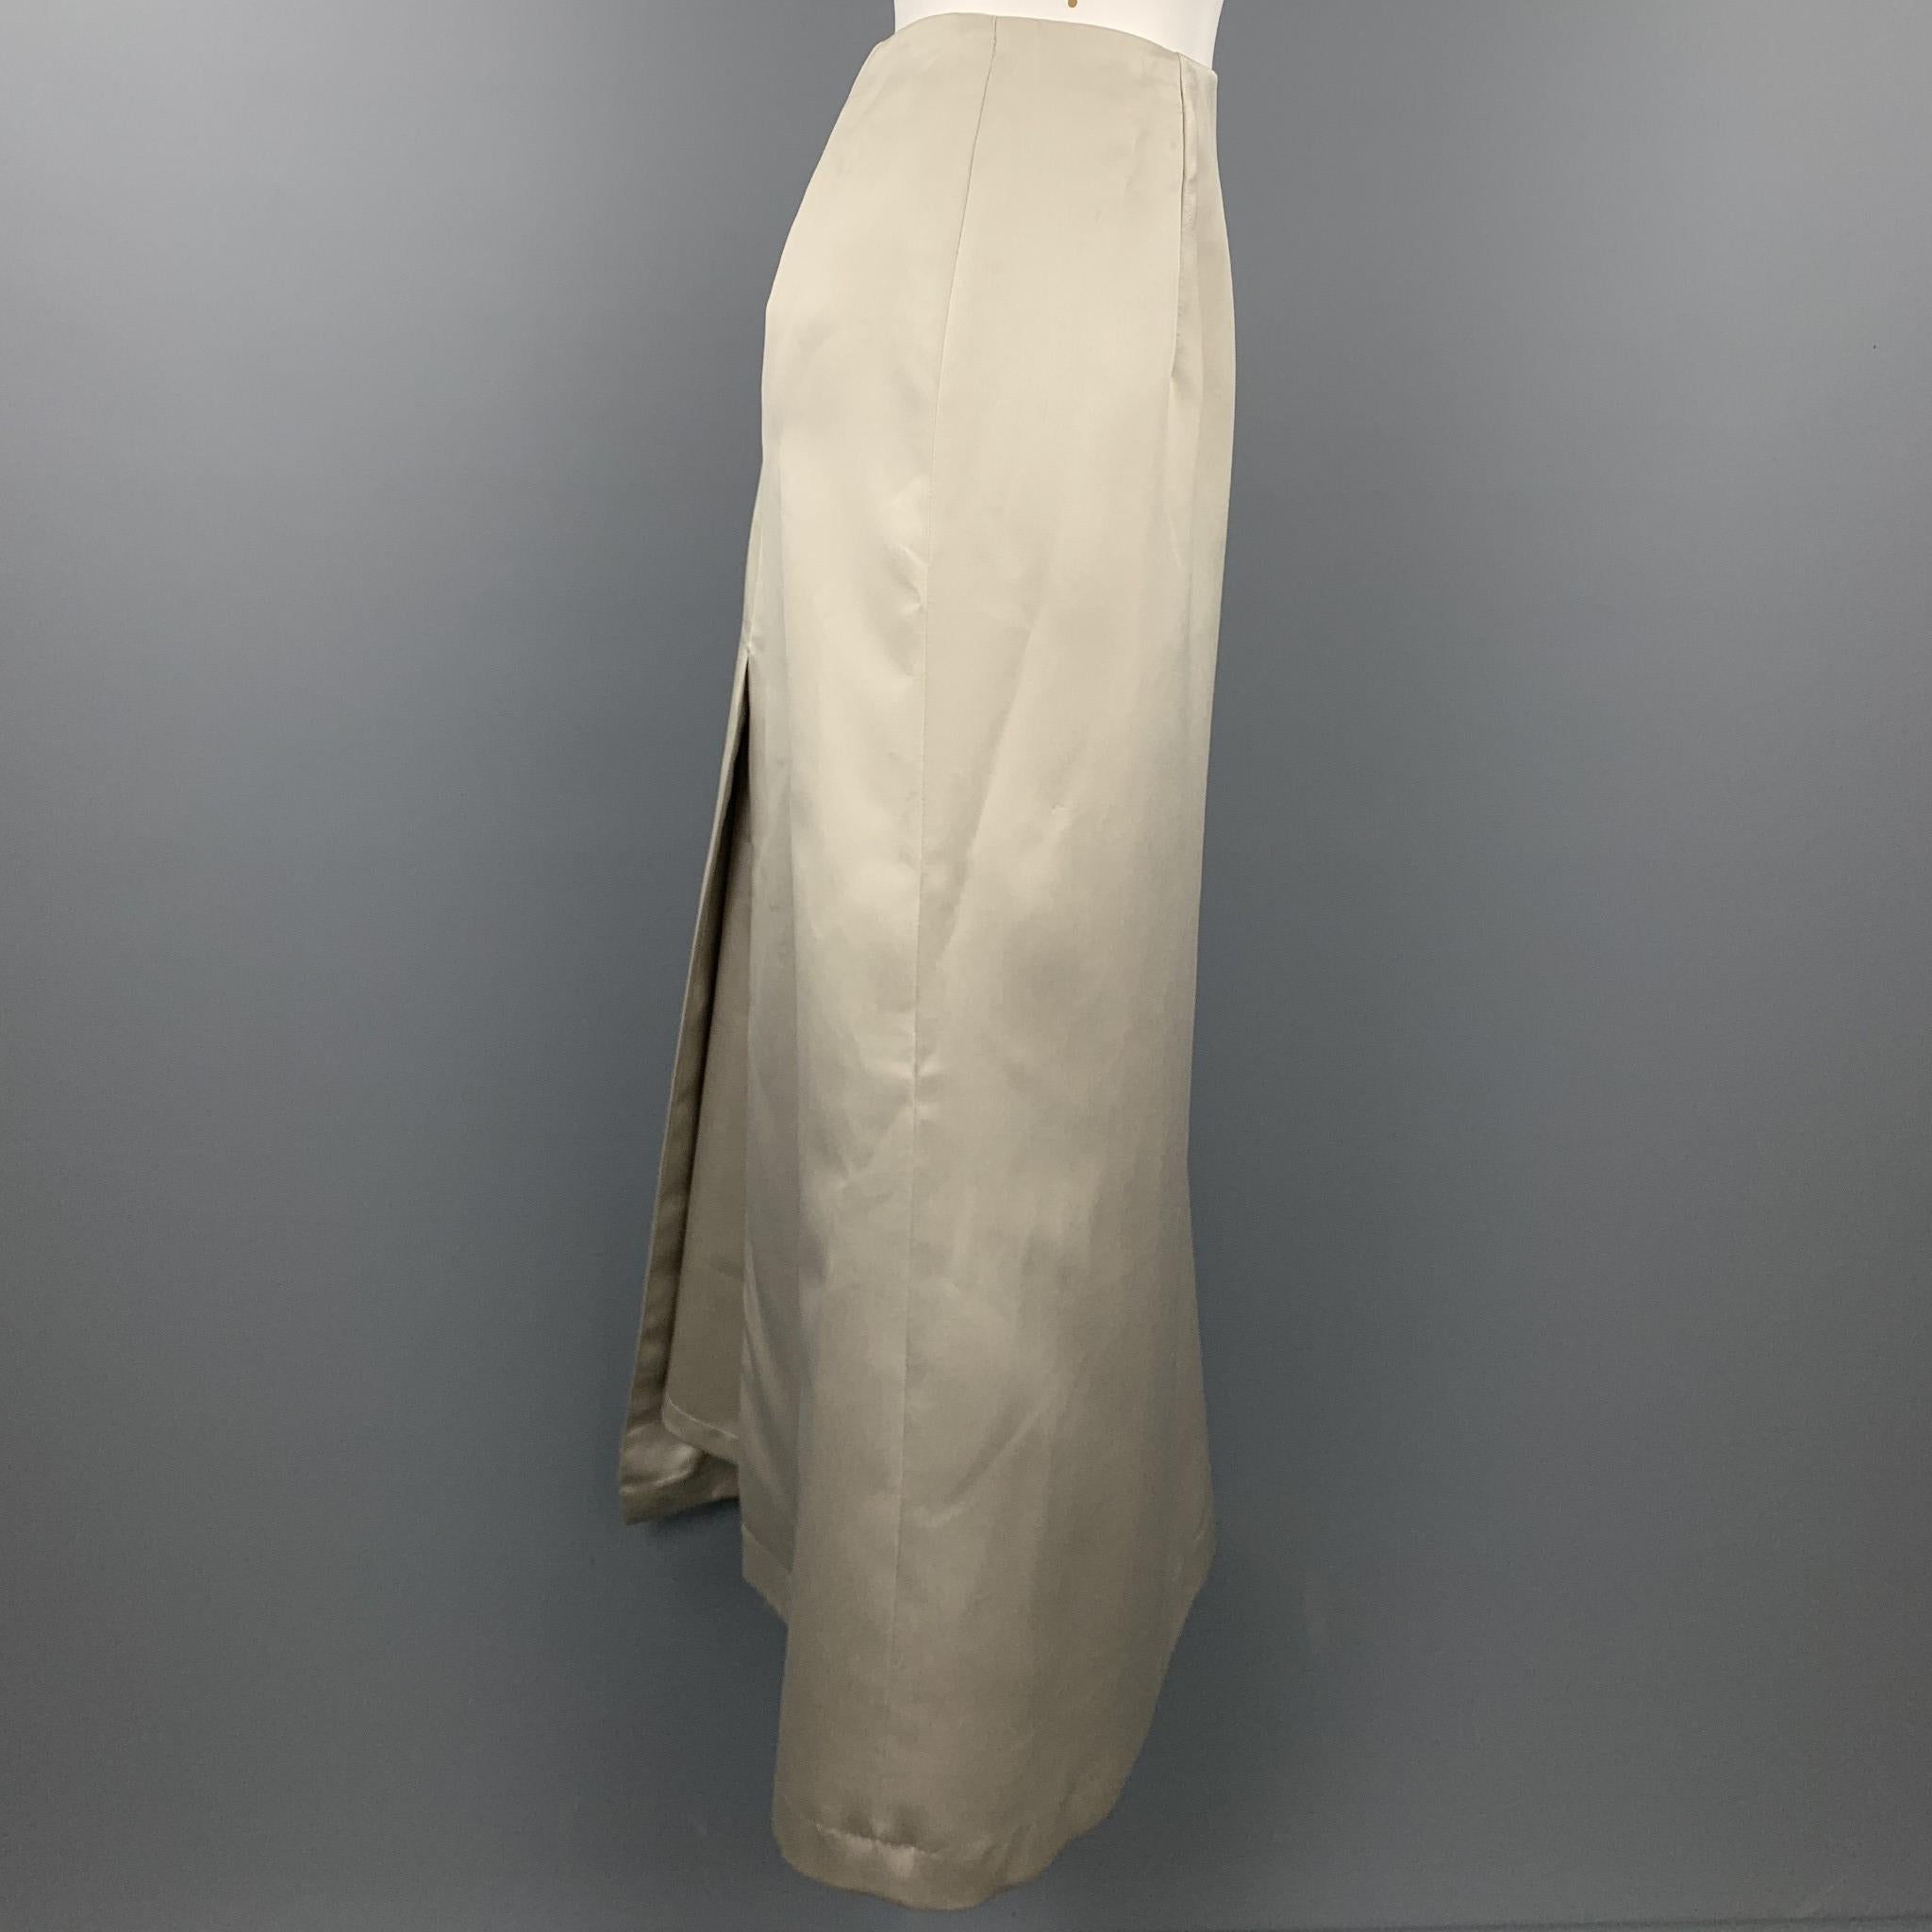 VERA WANG skirt comes in a champagne satin polyester with a slip liner featuring a long a-line style and a side zipper closure. Made in USA.

Good Pre-Owned Condition.
Marked: 12

Measurements:

Waist: 30 in. 
Hip: 41 in. 
Length: 36 in. 